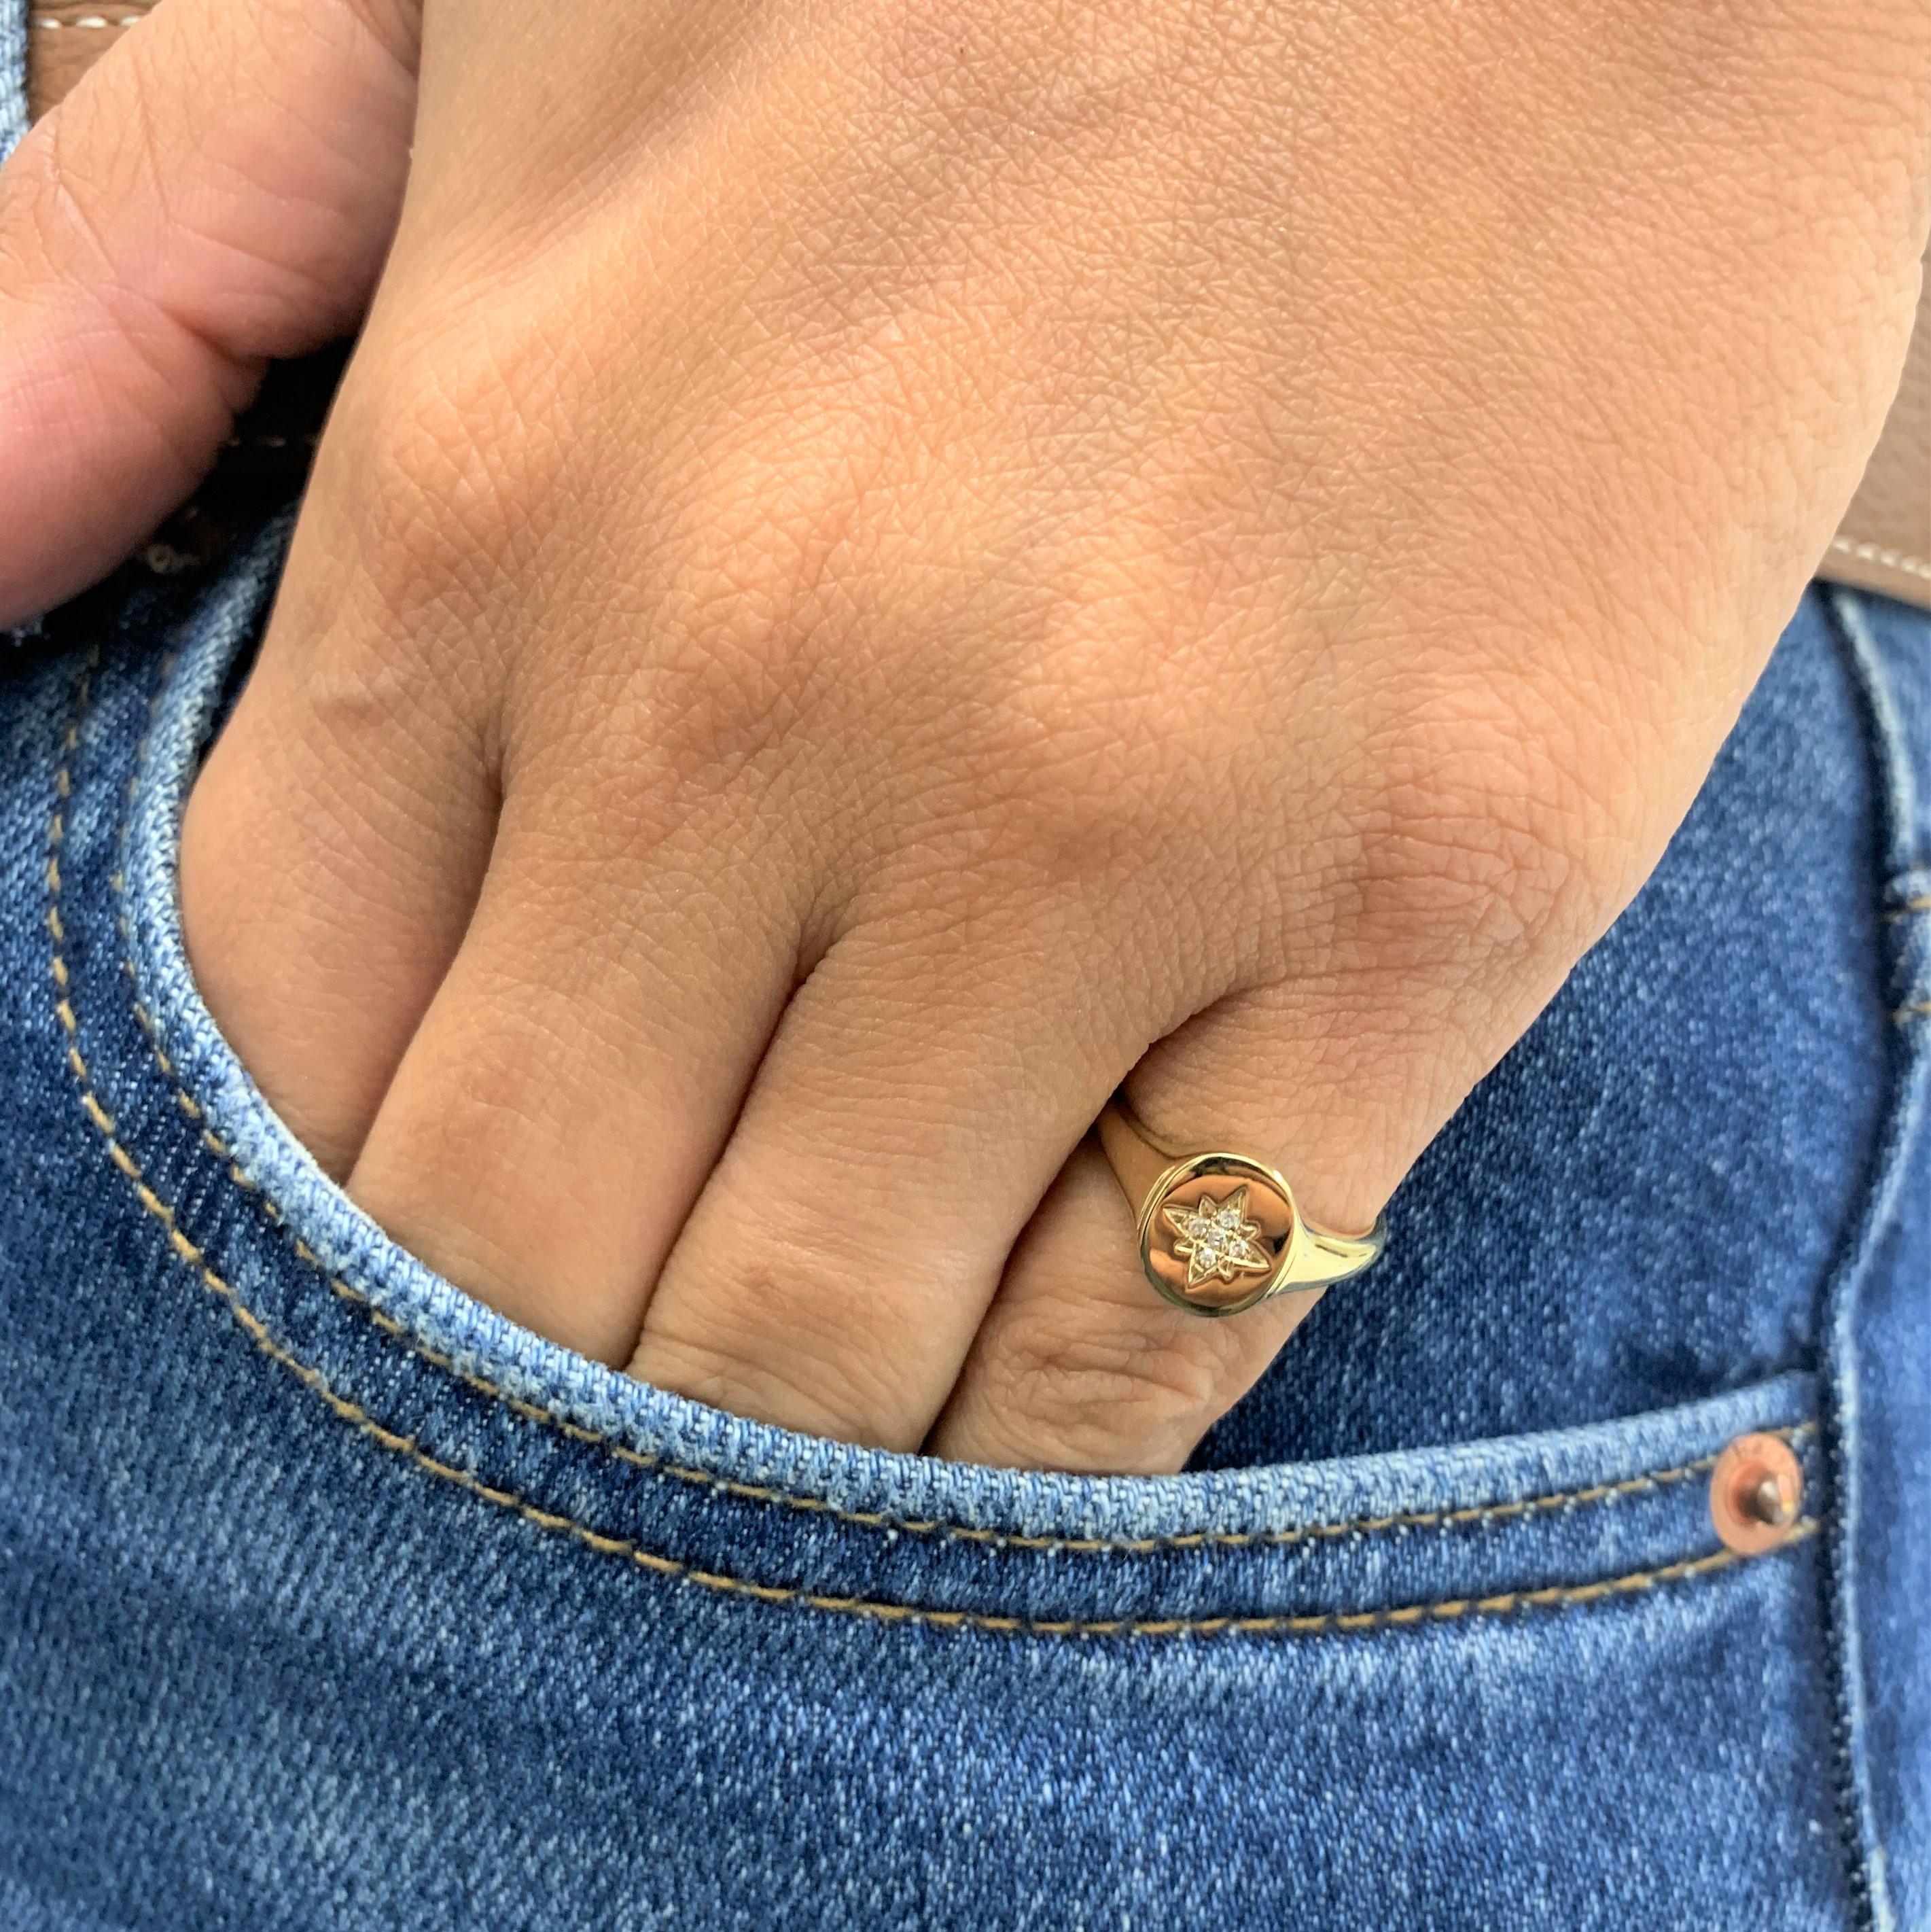 Add this precious Diamond Signet ring to your look! Crafted of 14K gold and available in Yellow, Rose & White Gold, this ring features 0.02 carats of Natural Round Diamonds. Its a pinky ring size 4.
-14K Gold
-5 Diamonds 0.02 carats
-Color & Clarity